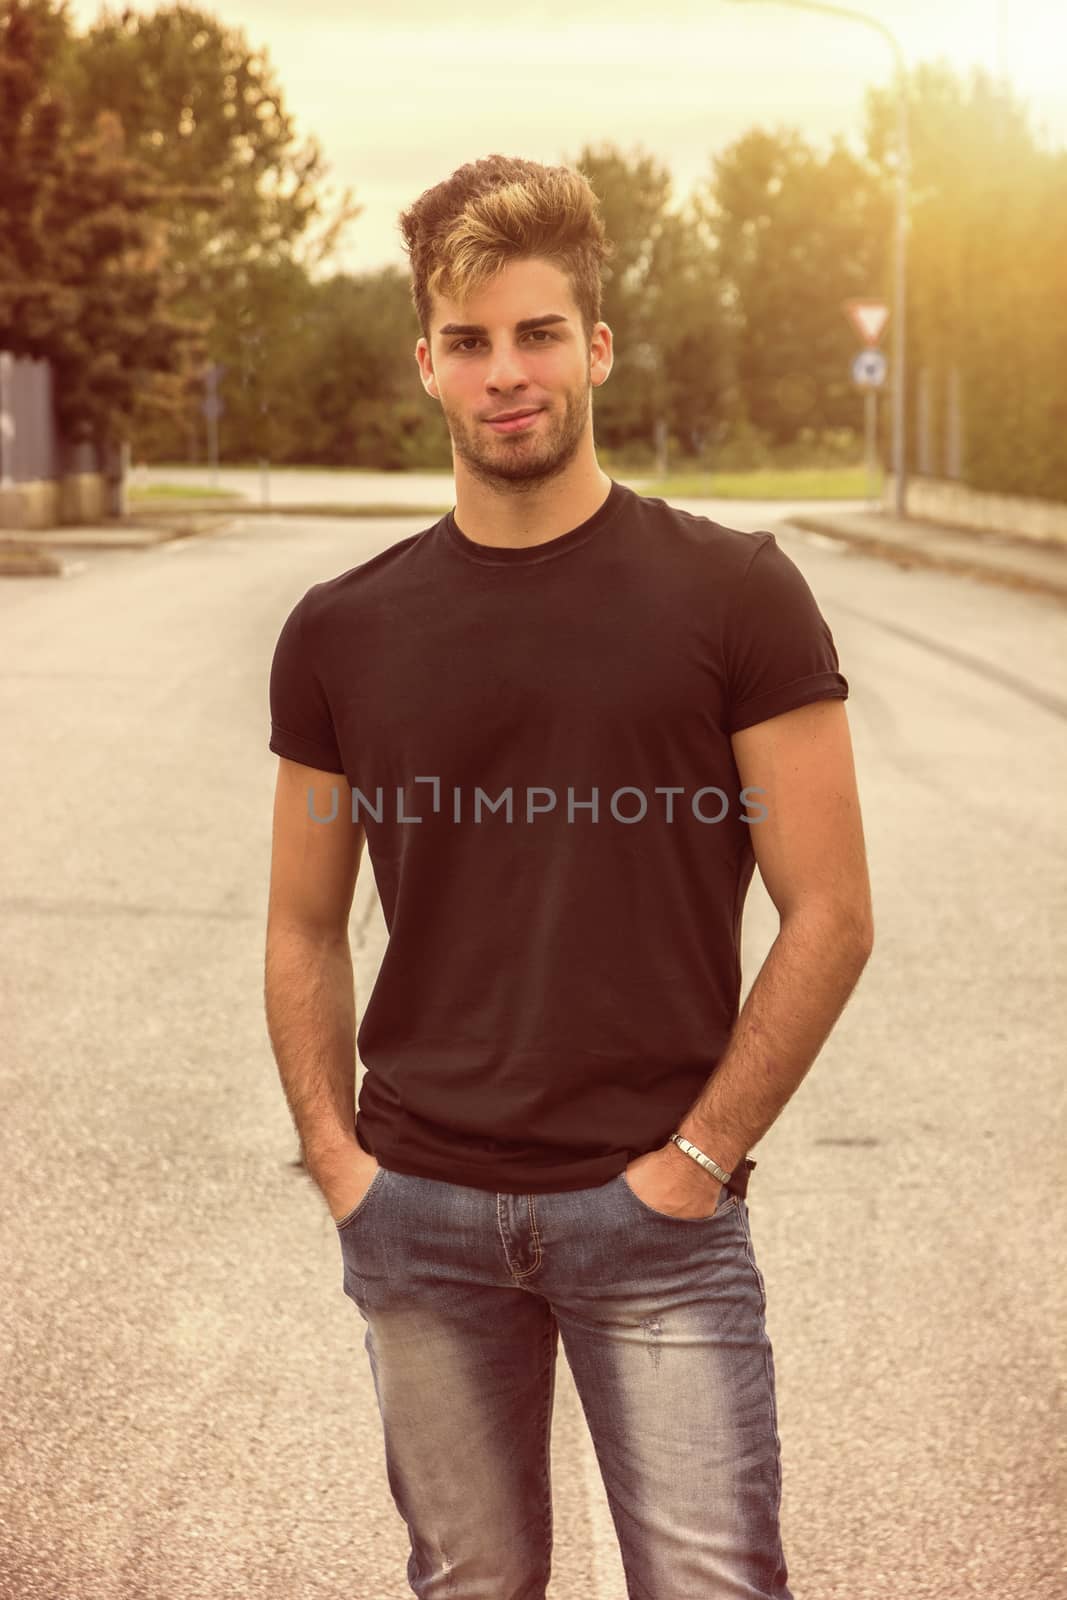 Attractive smiling man standing in the middle of city street by artofphoto